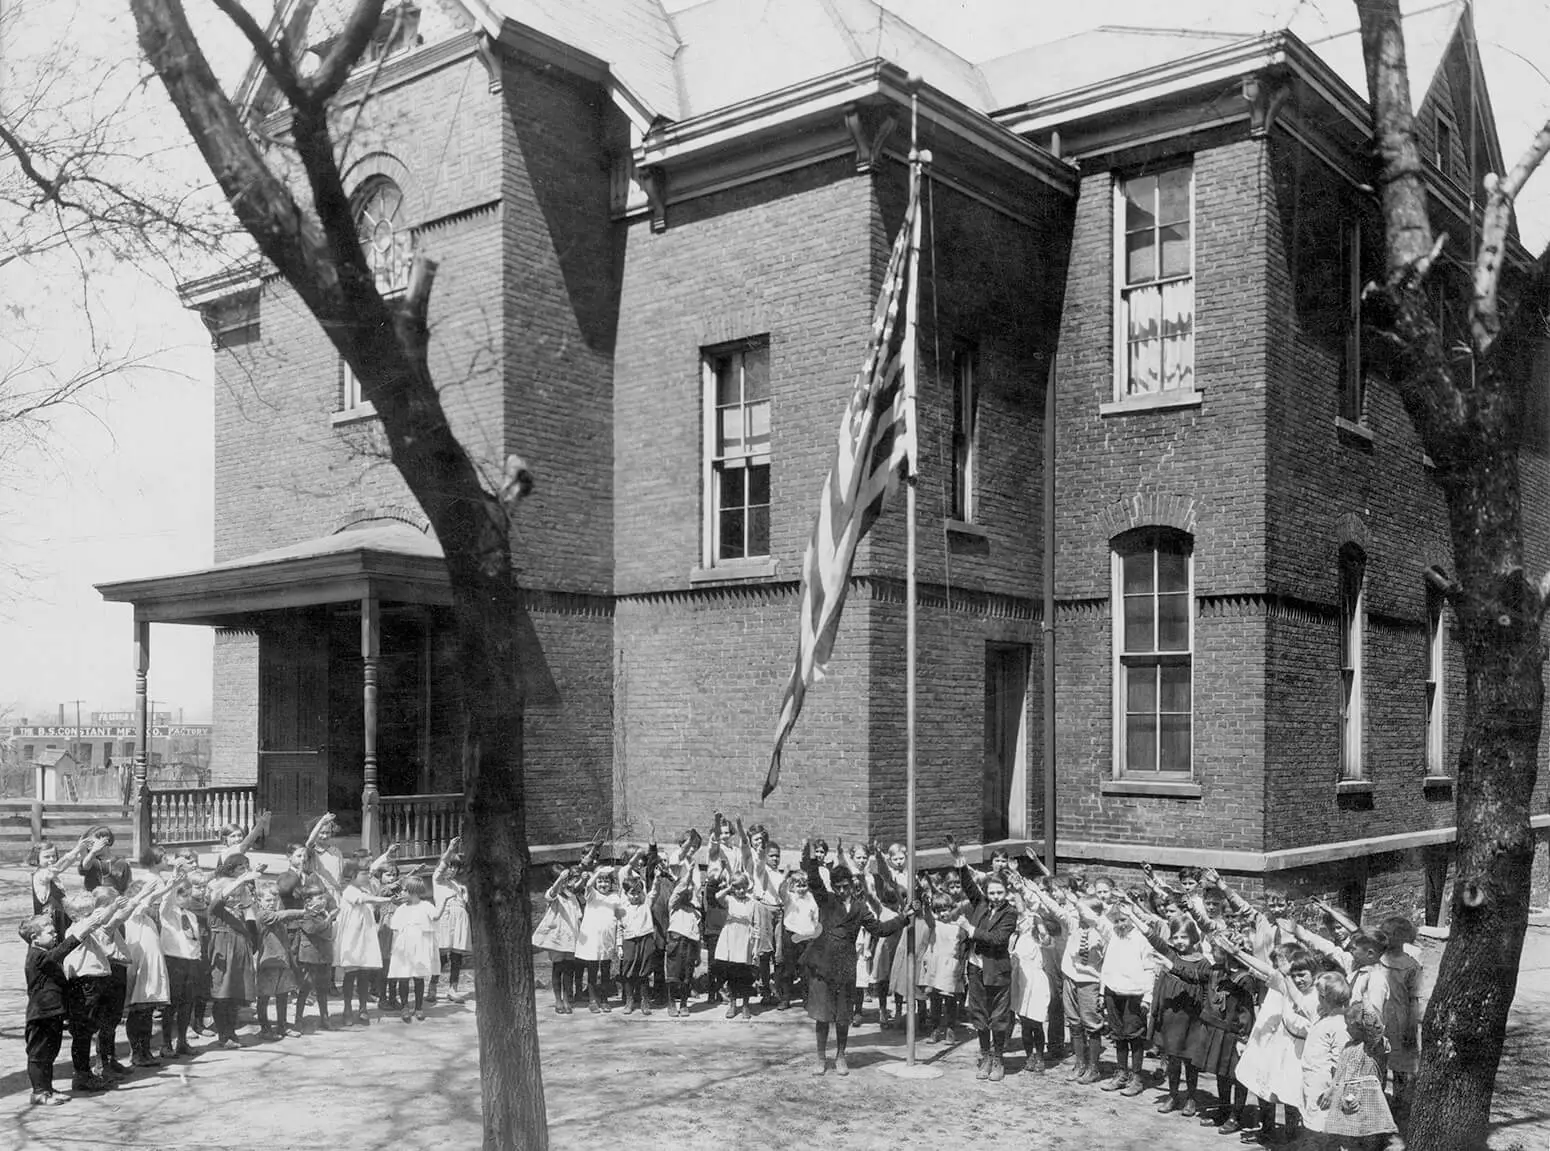 Black and white photo of a large group of children standing outside a two-story brick schoolhouse with a large American flag. They have their hands raised in the air, as if they were presenting the flag for the photo.